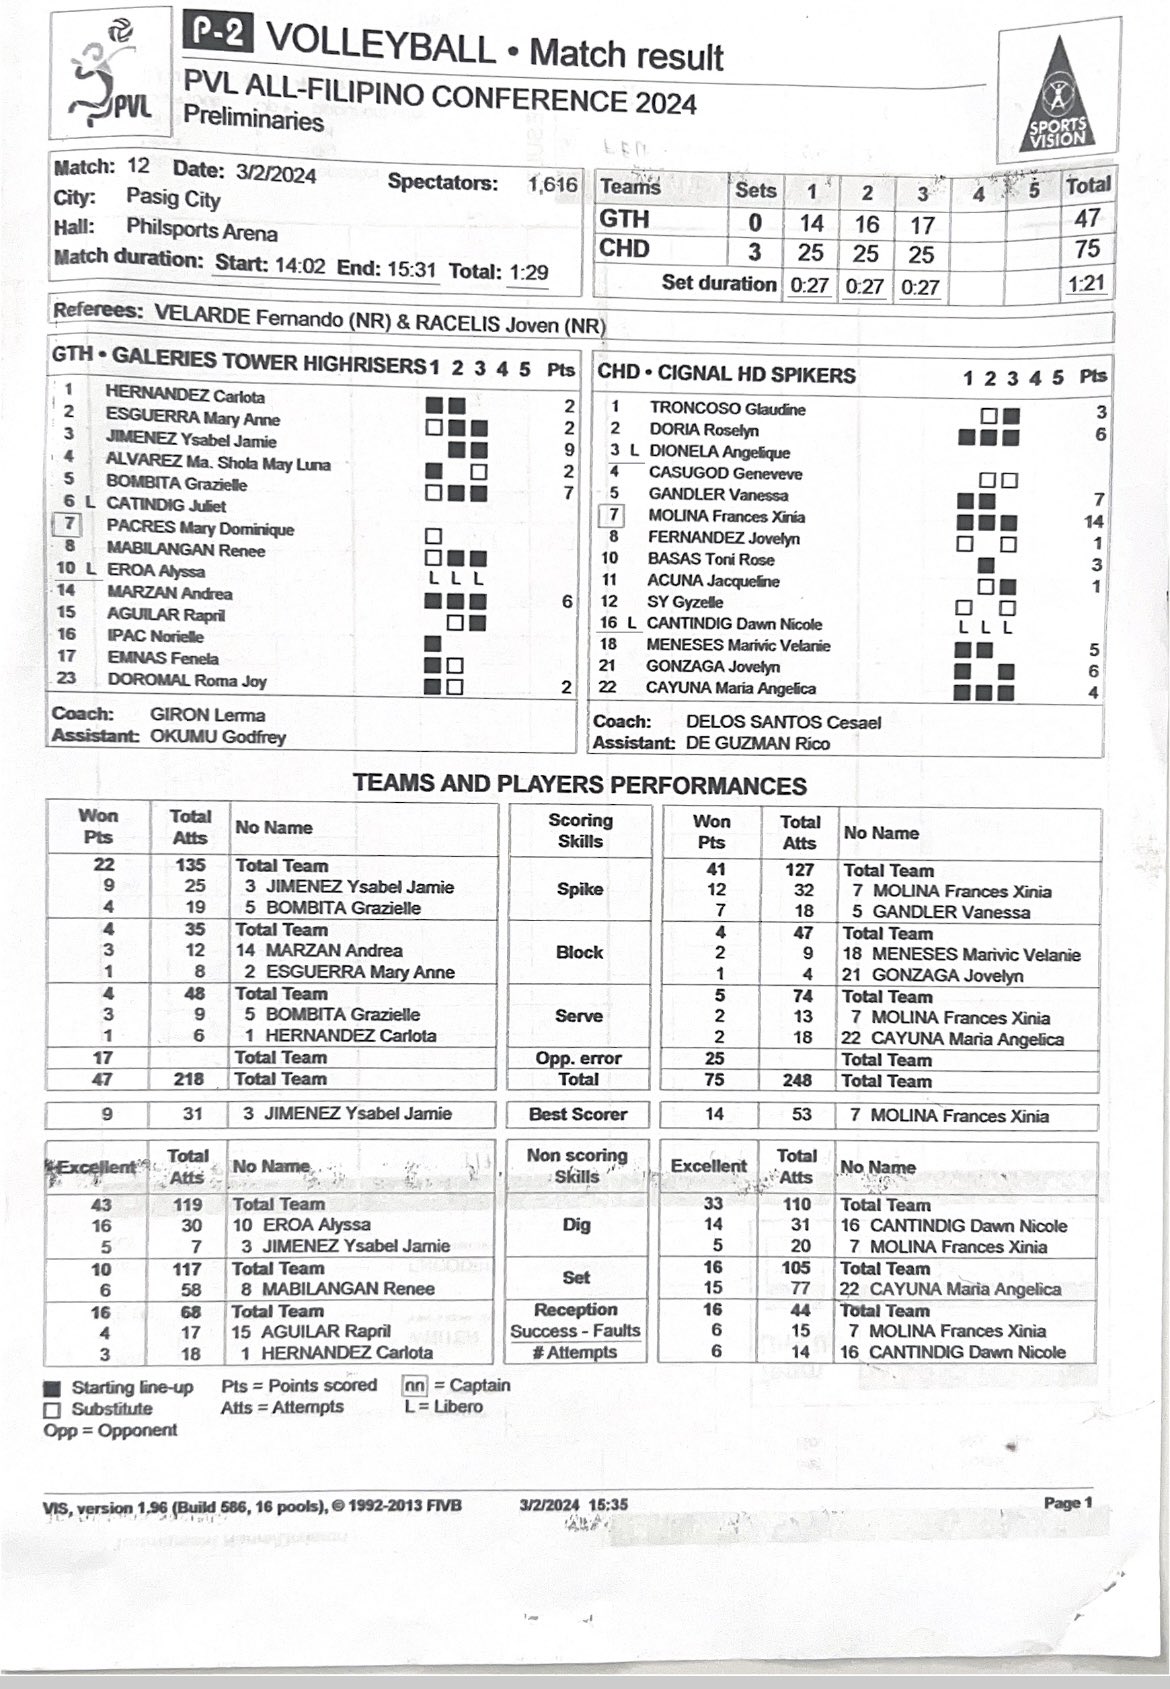 STATS: Cignal HD Spikers vs Galeries Tower High Risers March 3